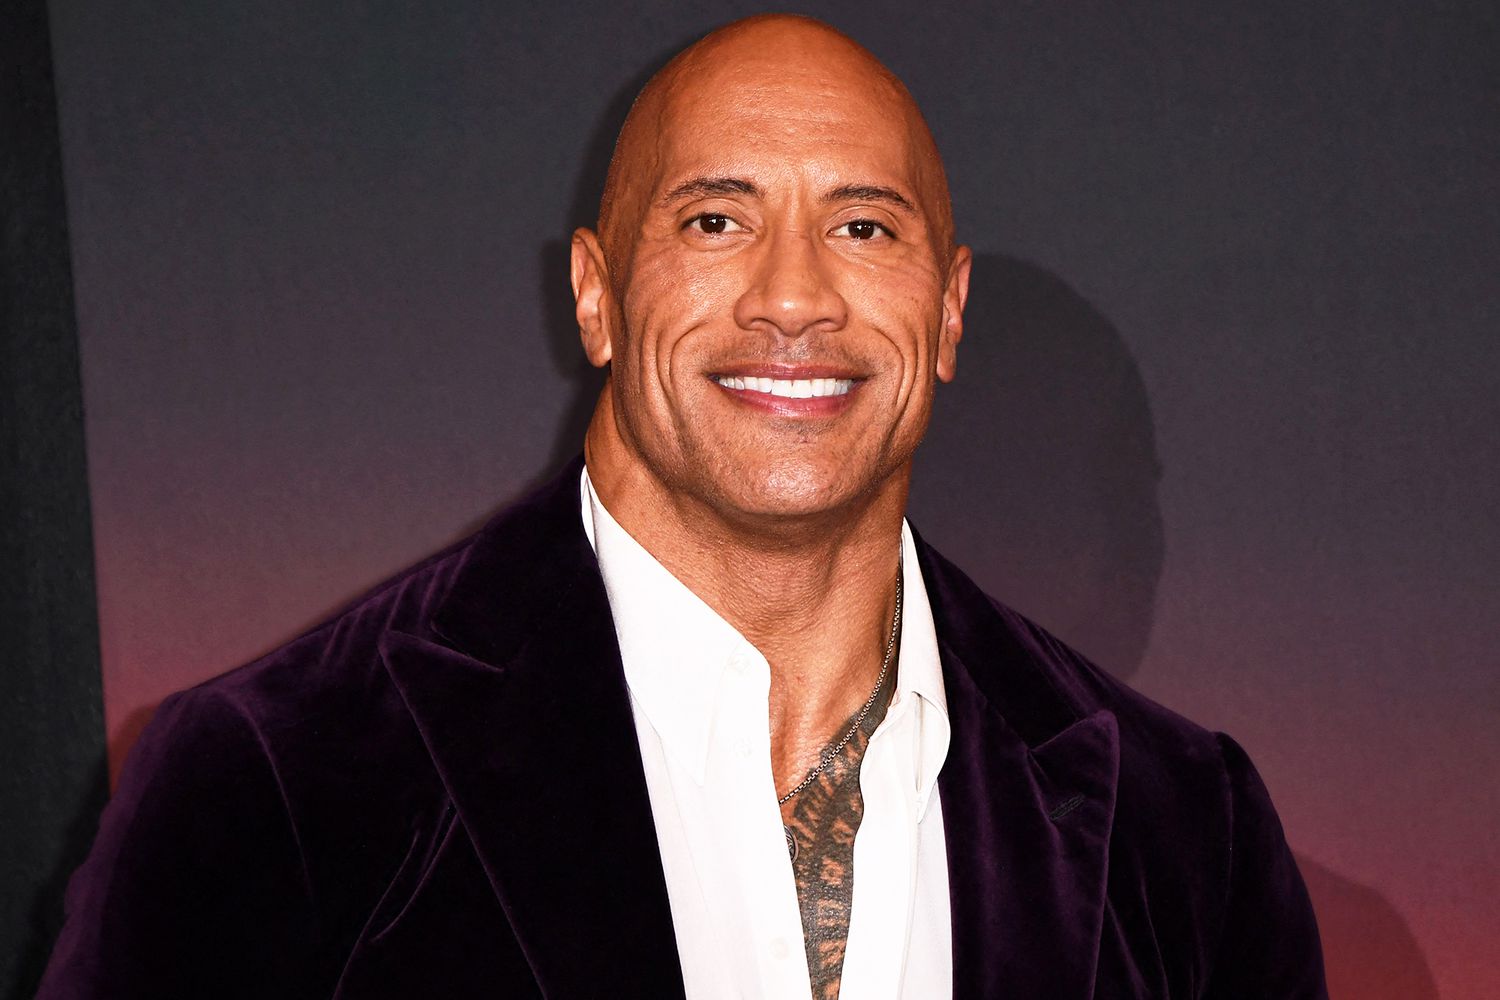 Dwayne Johnson attends the world premiere of Netflix's "Red Notice" at LA Live in Los Angeles on November 3, 2021.